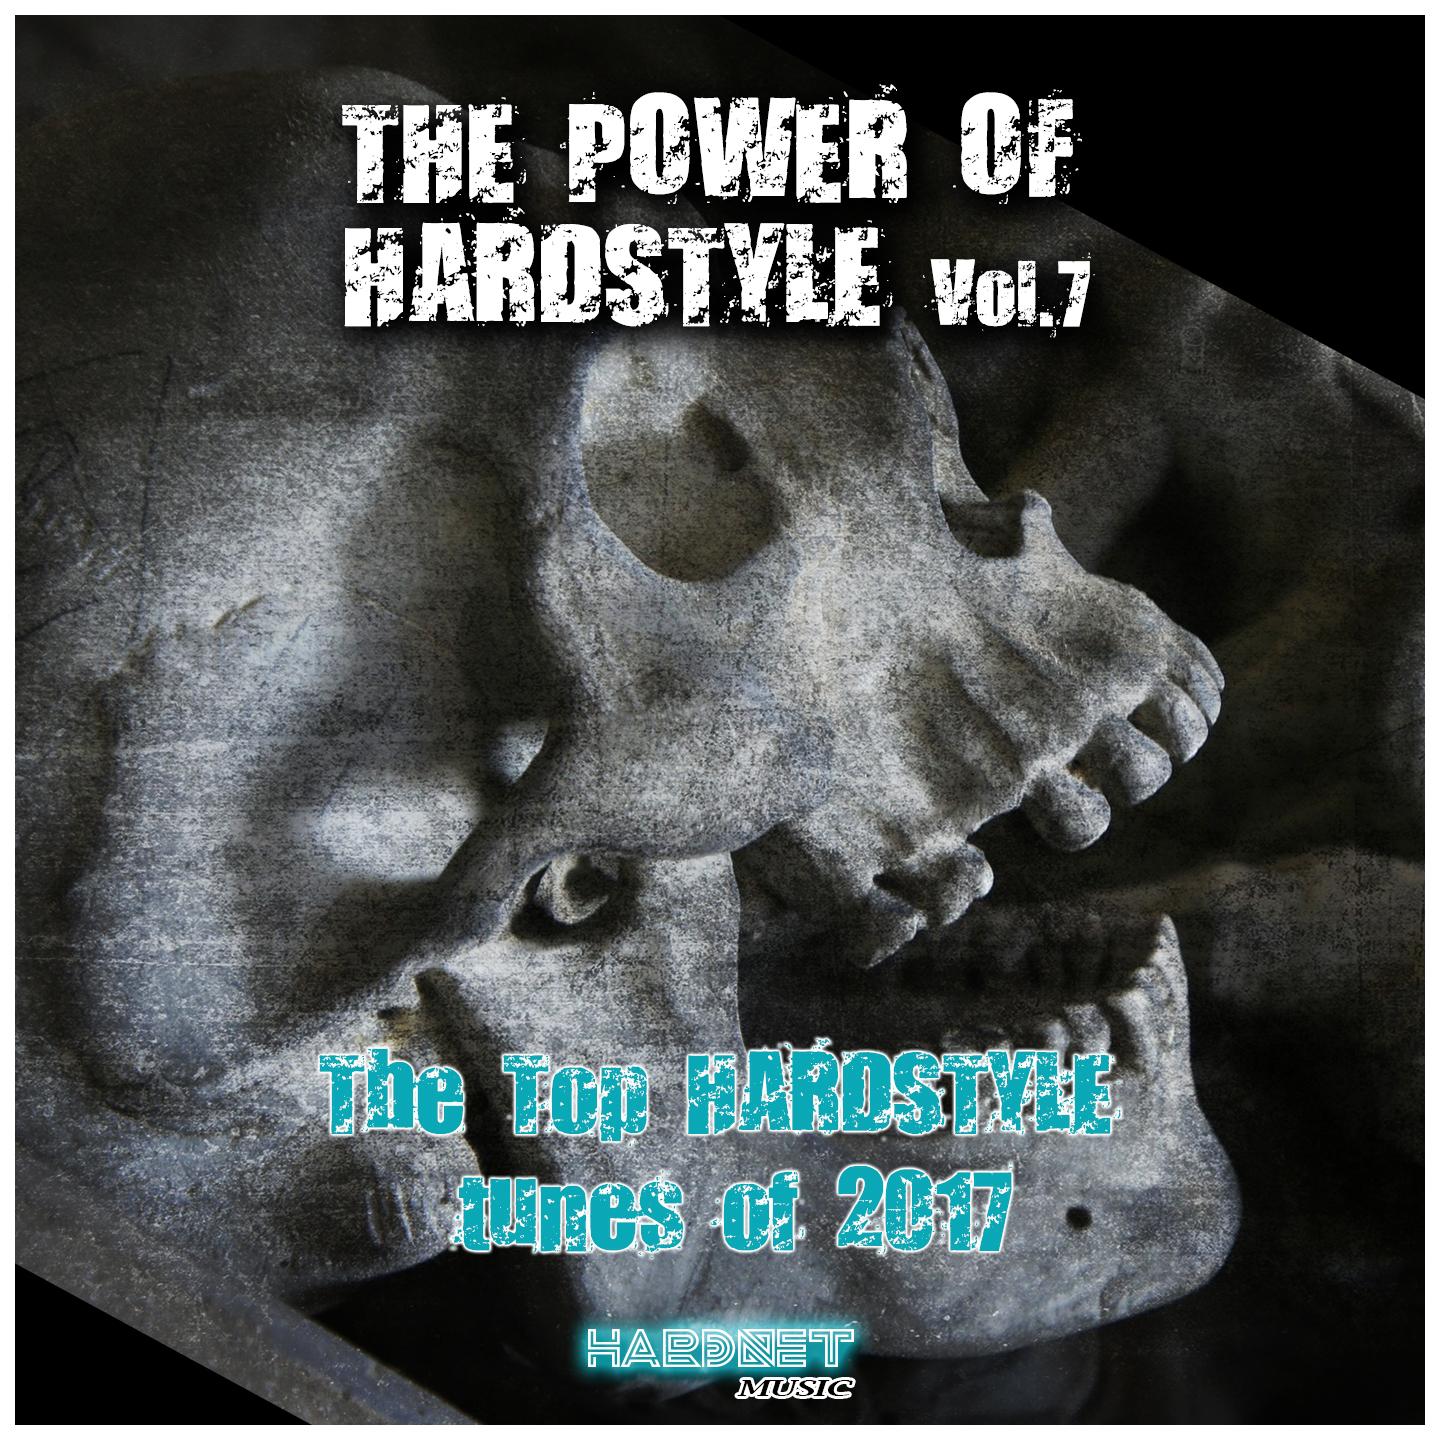 The Power of Hardstyle, Vol. 7